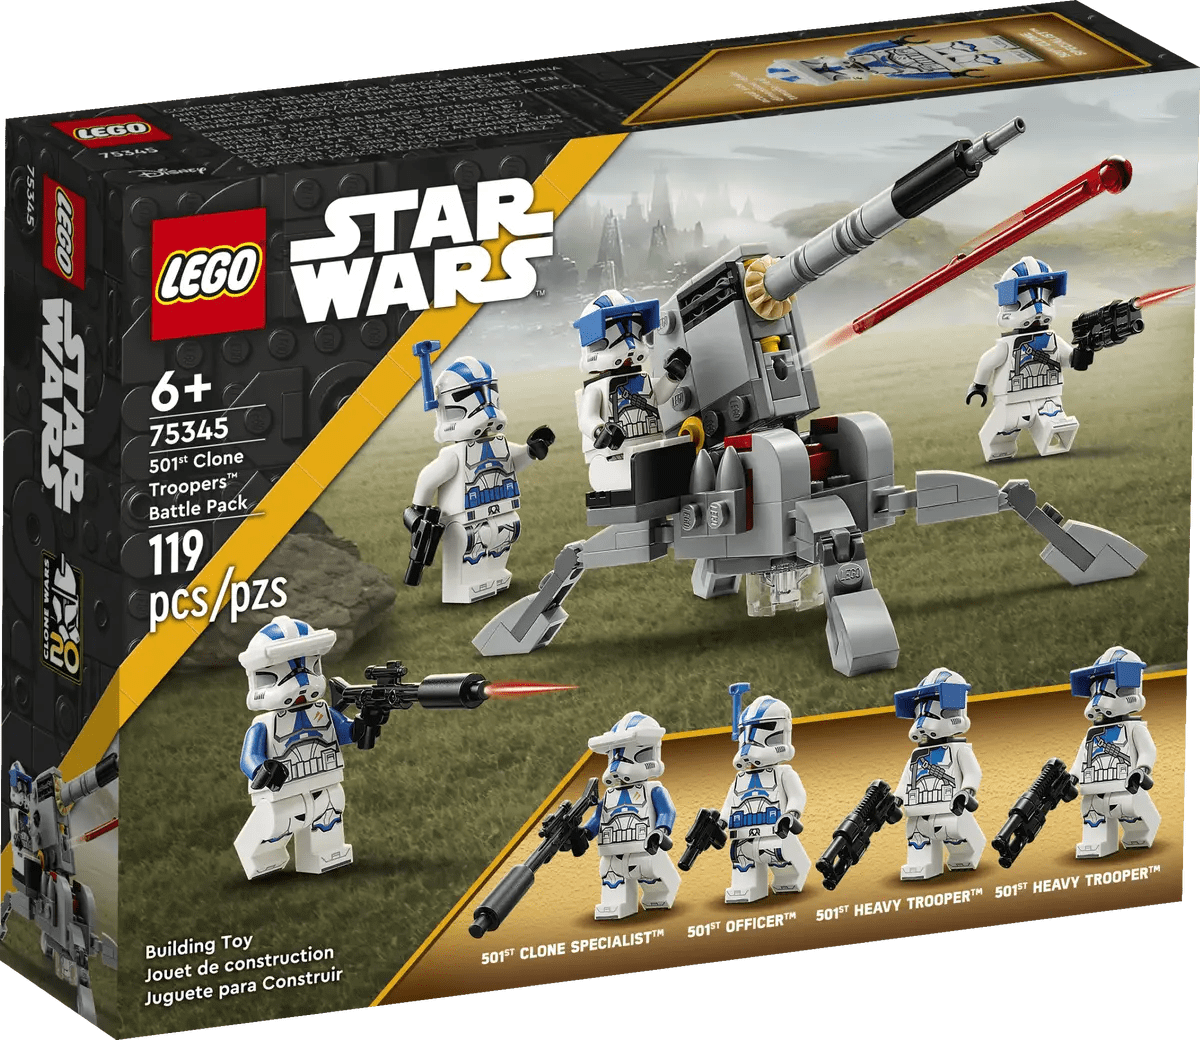 Lego Star Wars 501st Clone Troopers Battle Pack (75345) BOX